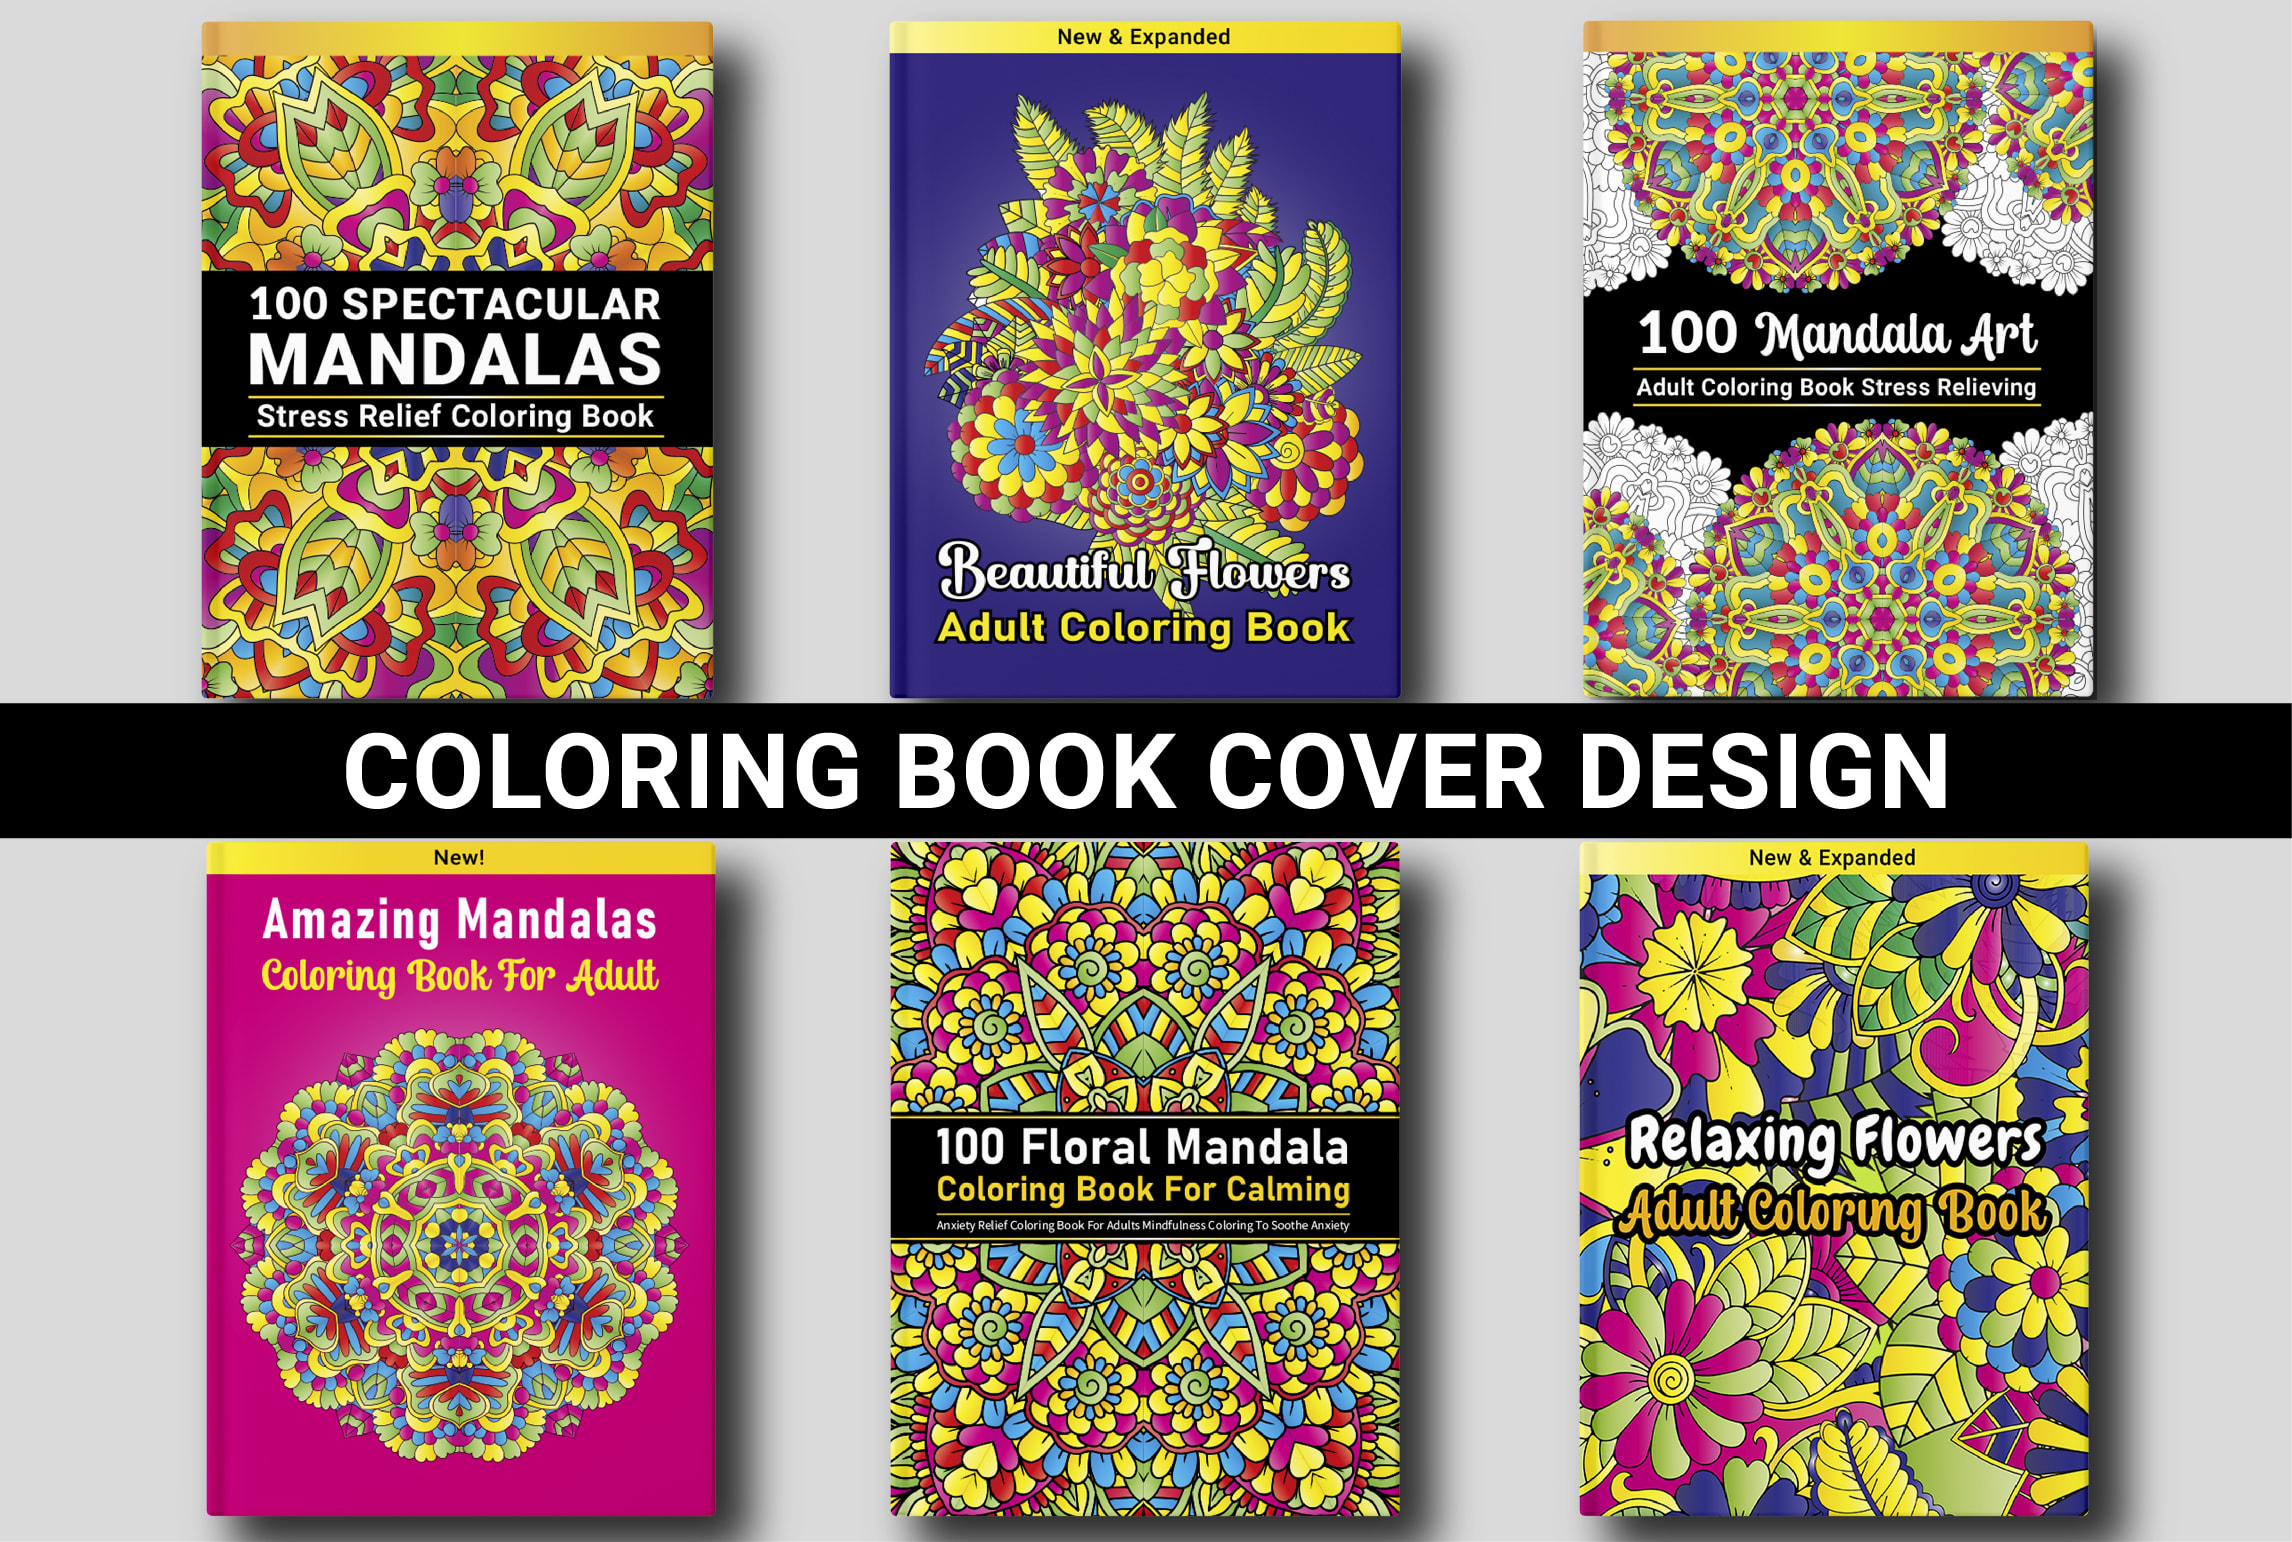 100 flower designs coloring book for adults: Relaxing Coloring